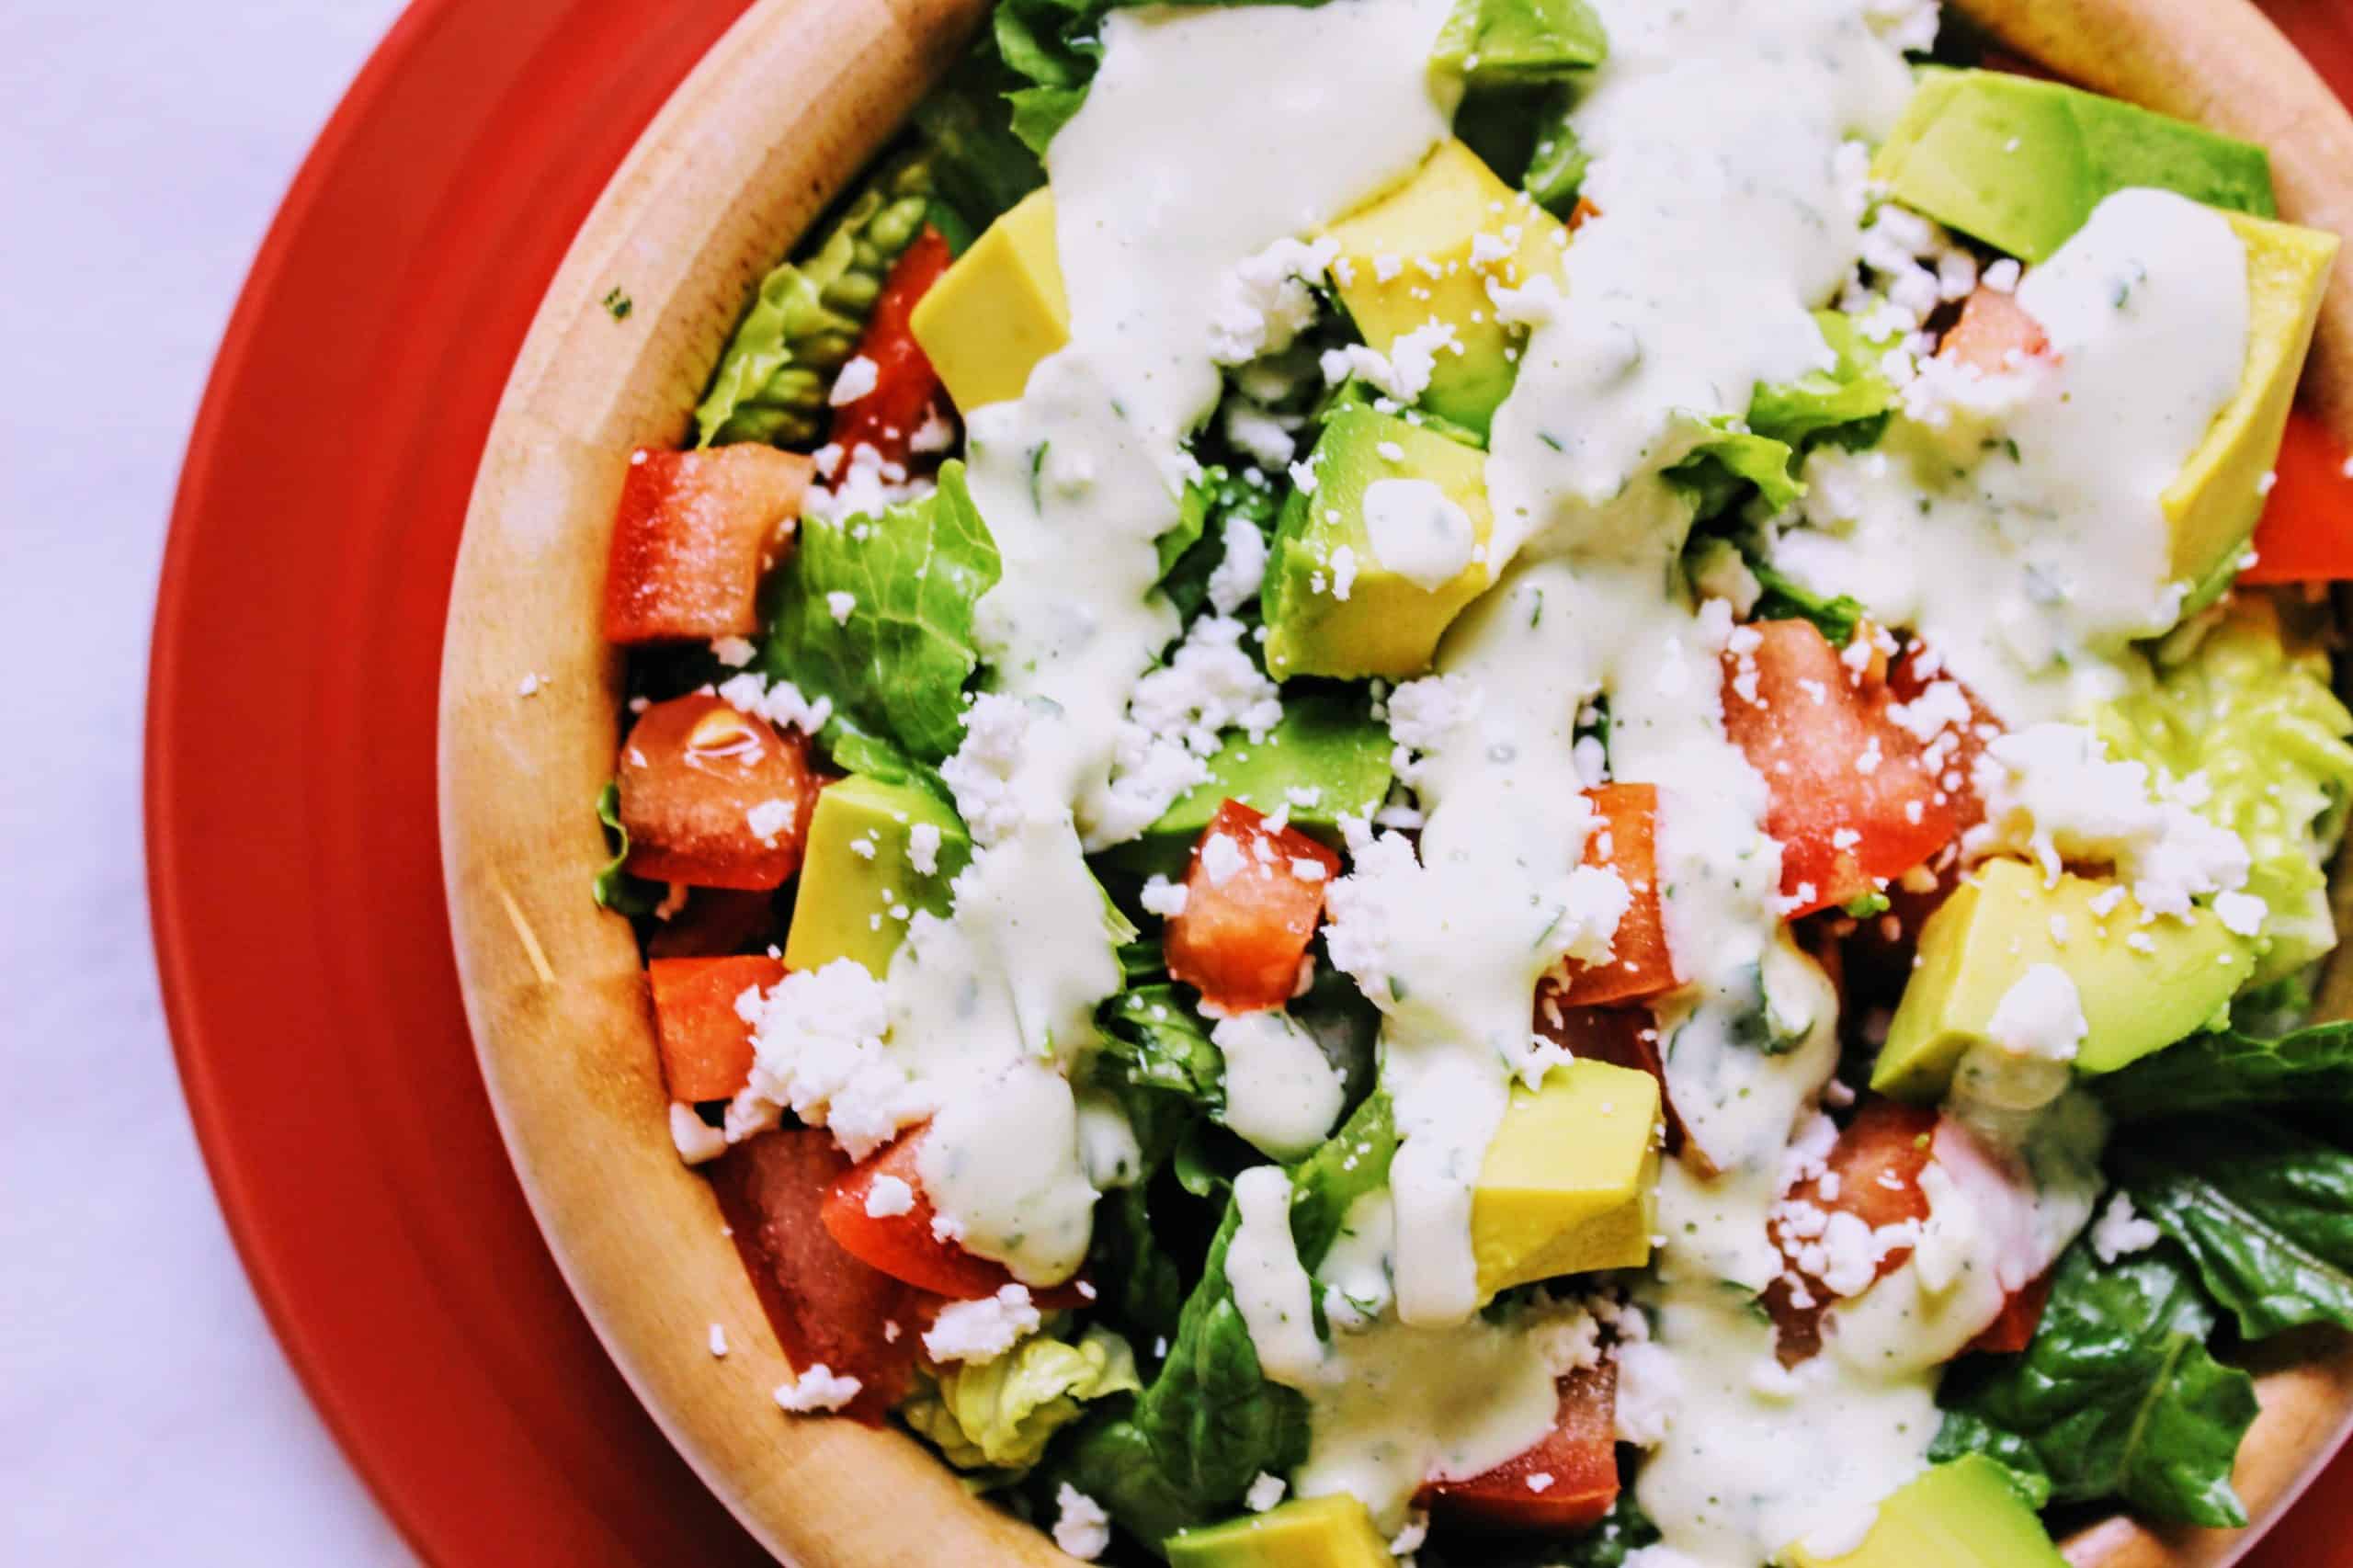 Tomato Cotija Salad with Tomatillo Dressing - Keen for Keto - 10 minutes!